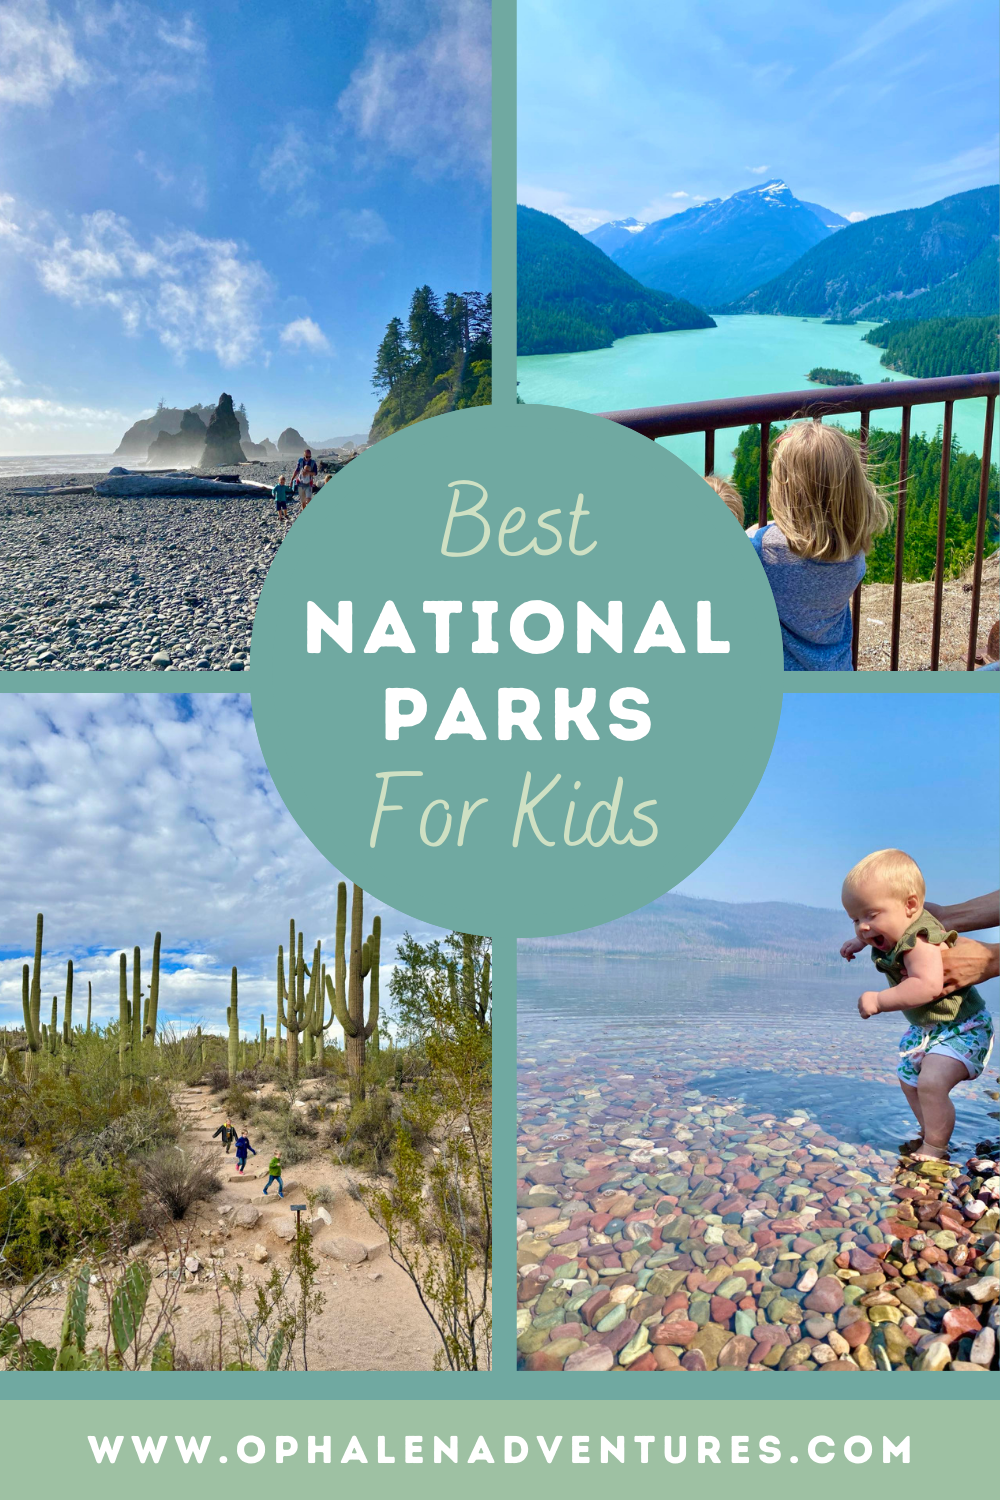 Best national parks for kids, 4 national parks shown are Olympic, Cascades, Saguaro, and Glacier | O'Phalen Adventures